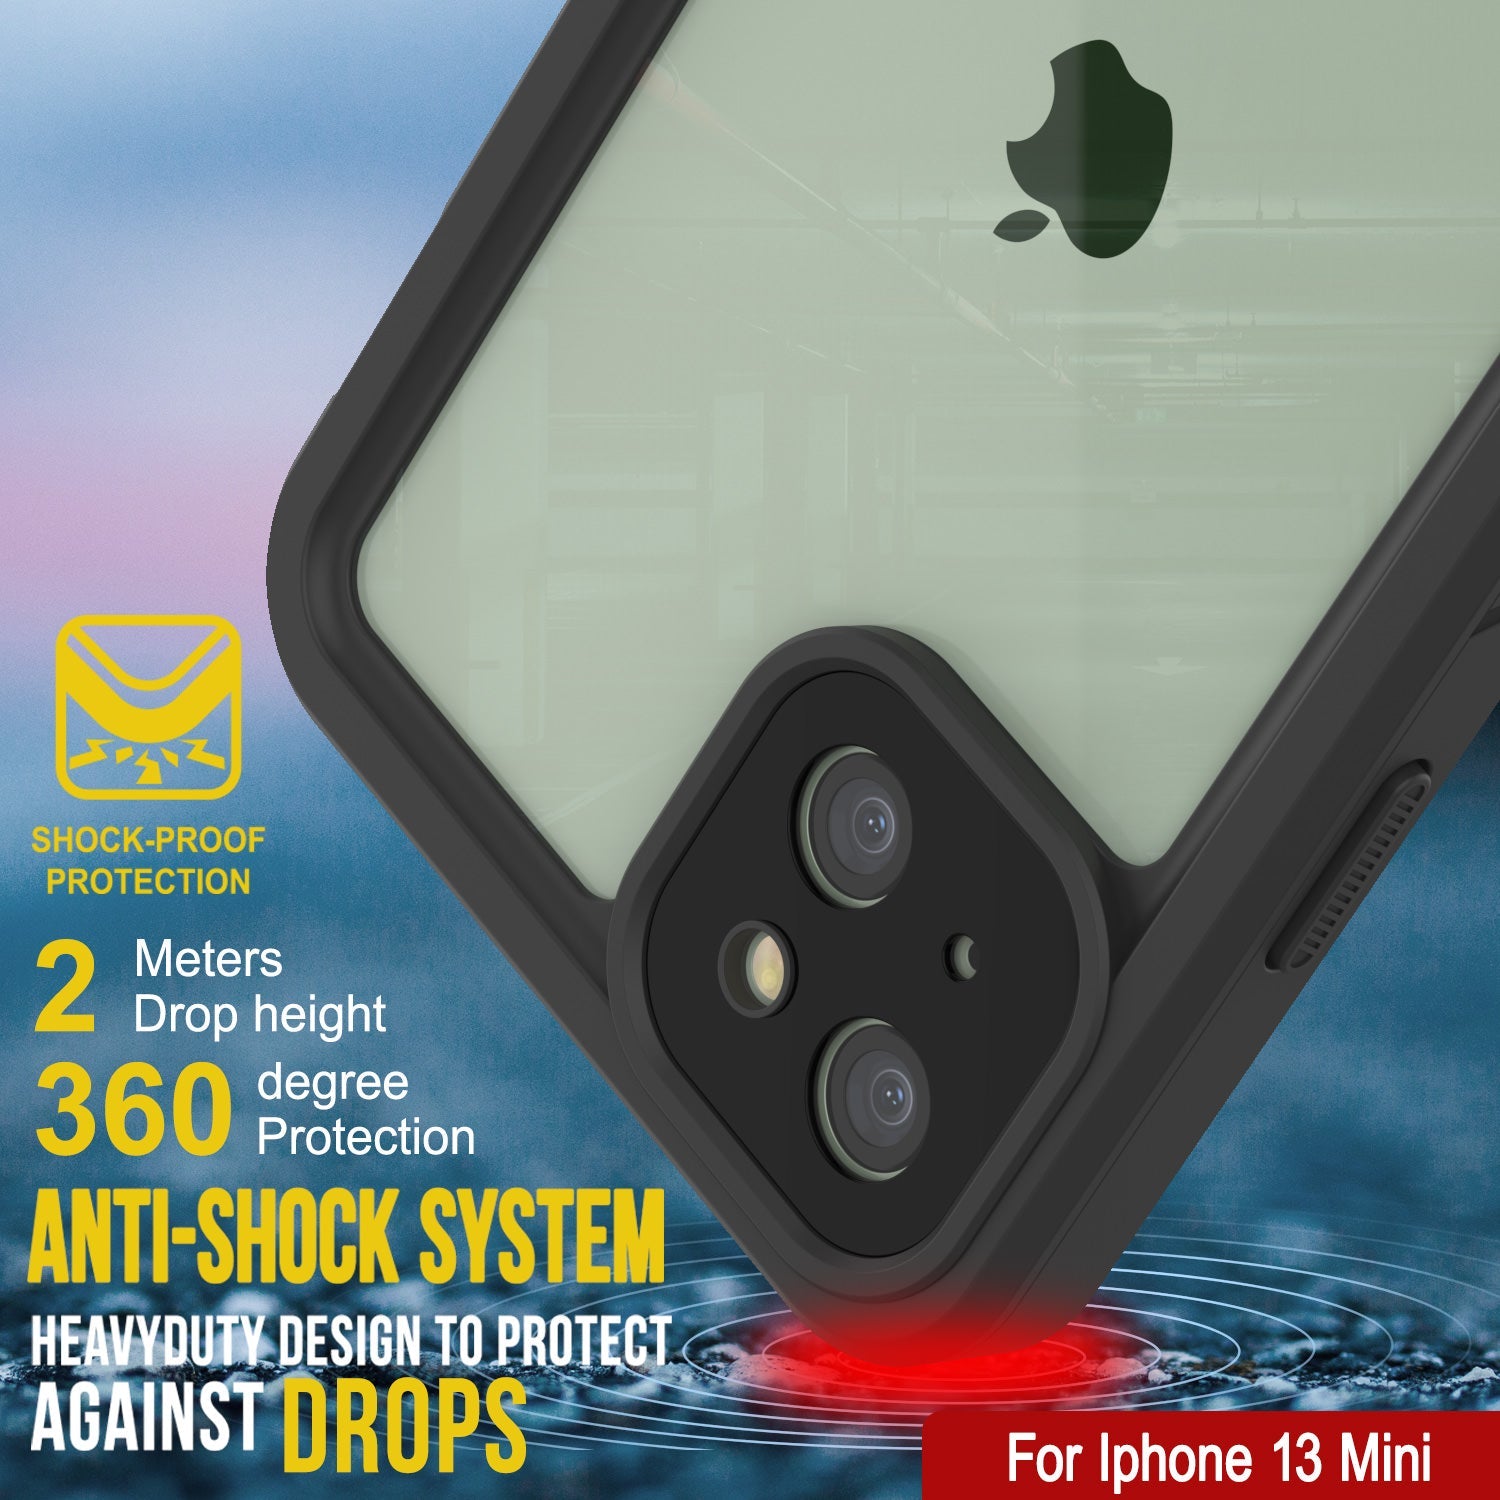 iPhone 13 Mini  Waterproof Case, Punkcase [Extreme Series] Armor Cover W/ Built In Screen Protector [Teal]